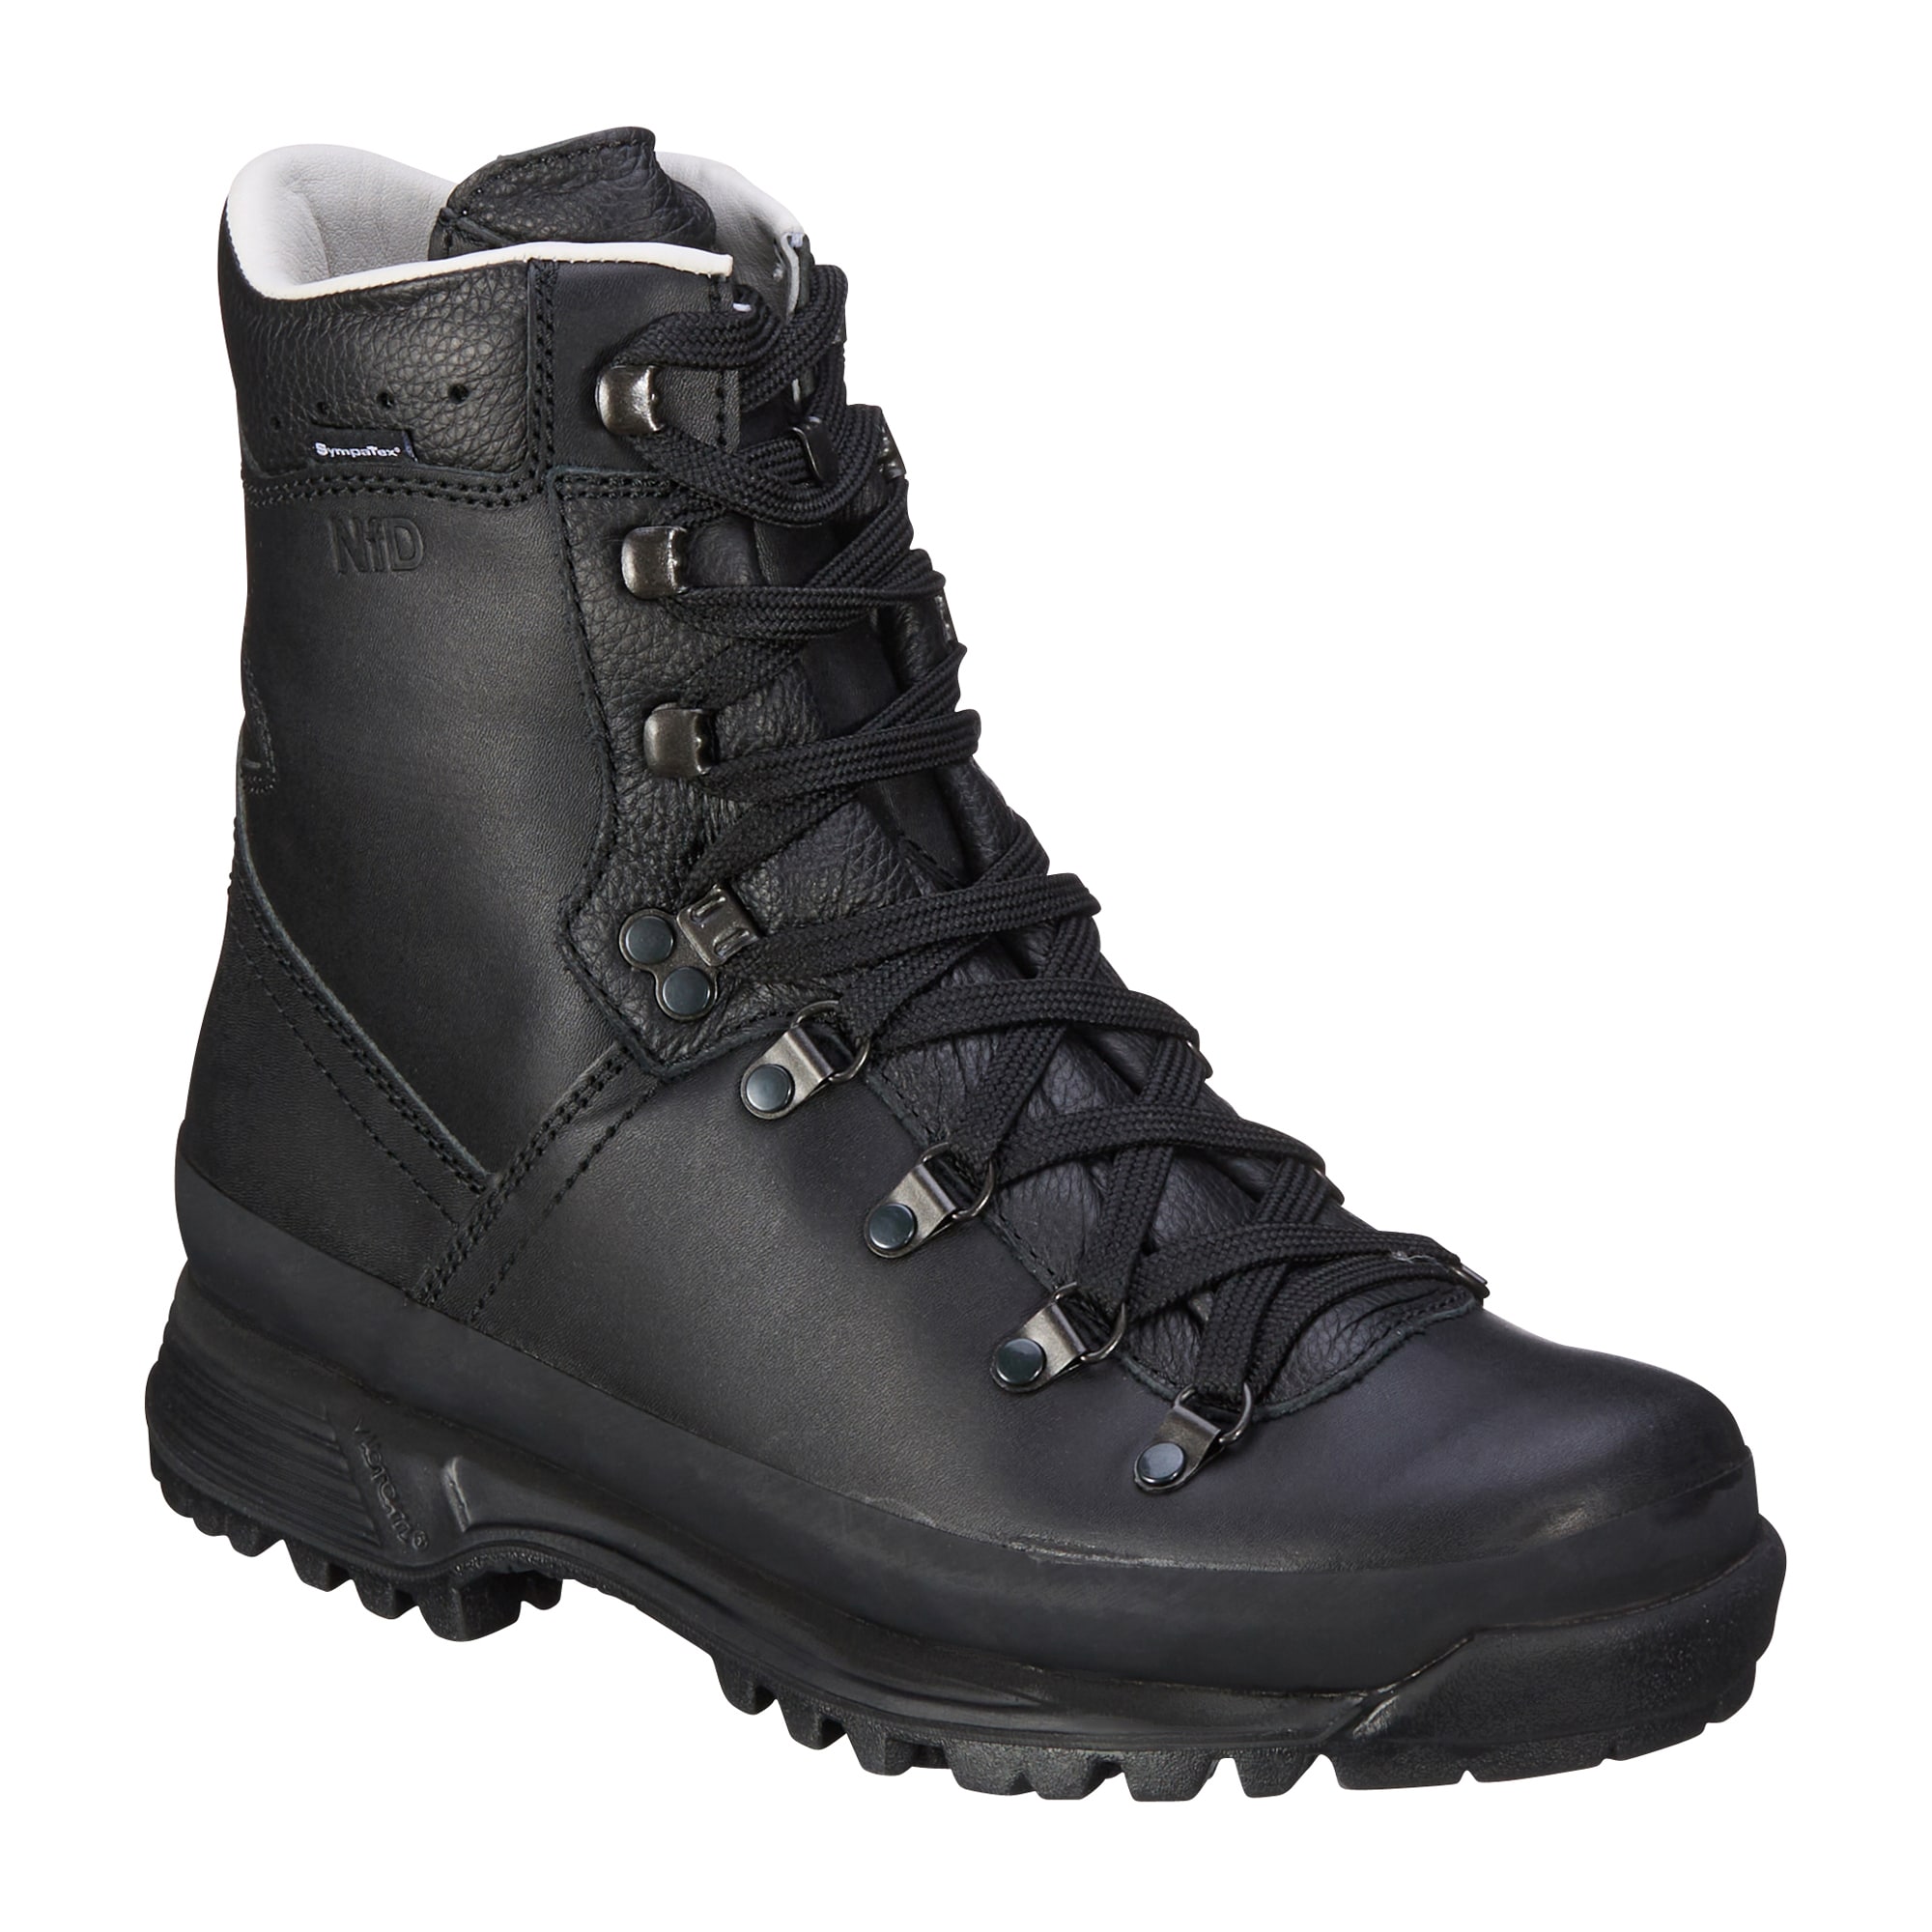 Purchase the NfD BW Mountain Boots Sympatex by ASMC